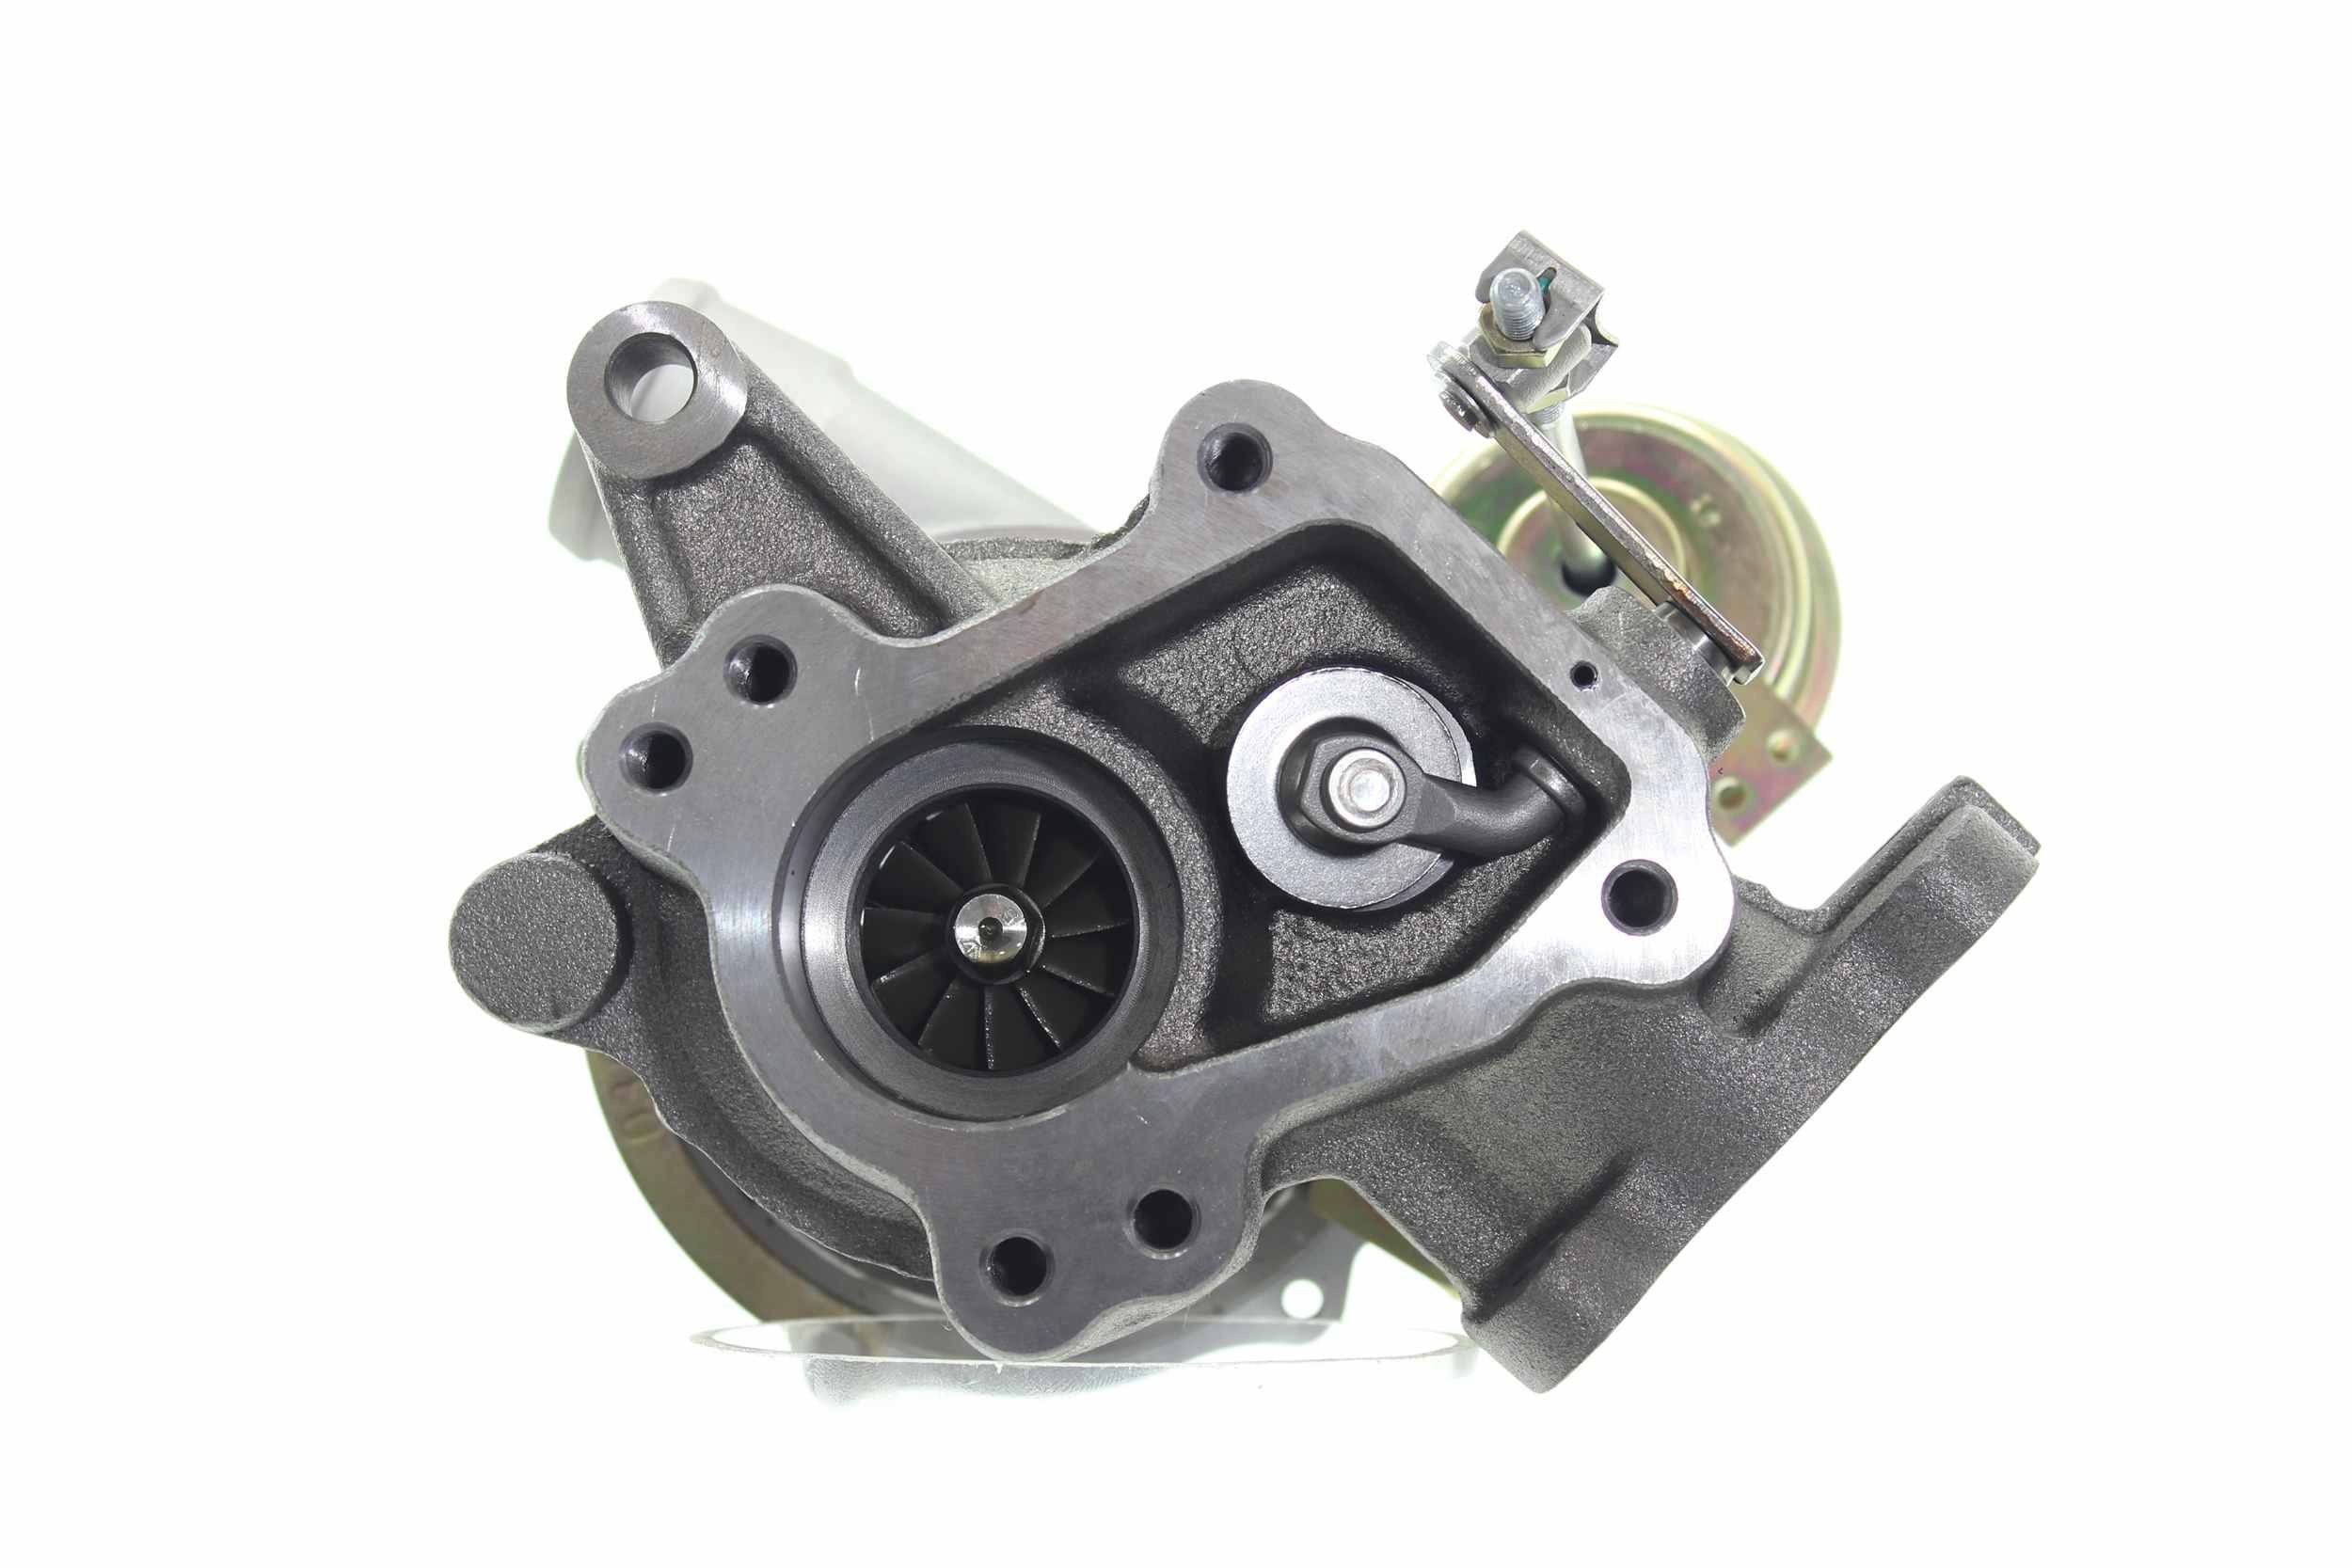 ALANKO 900038 Turbo Exhaust Turbocharger, Incl. Gasket Set, with attachment material